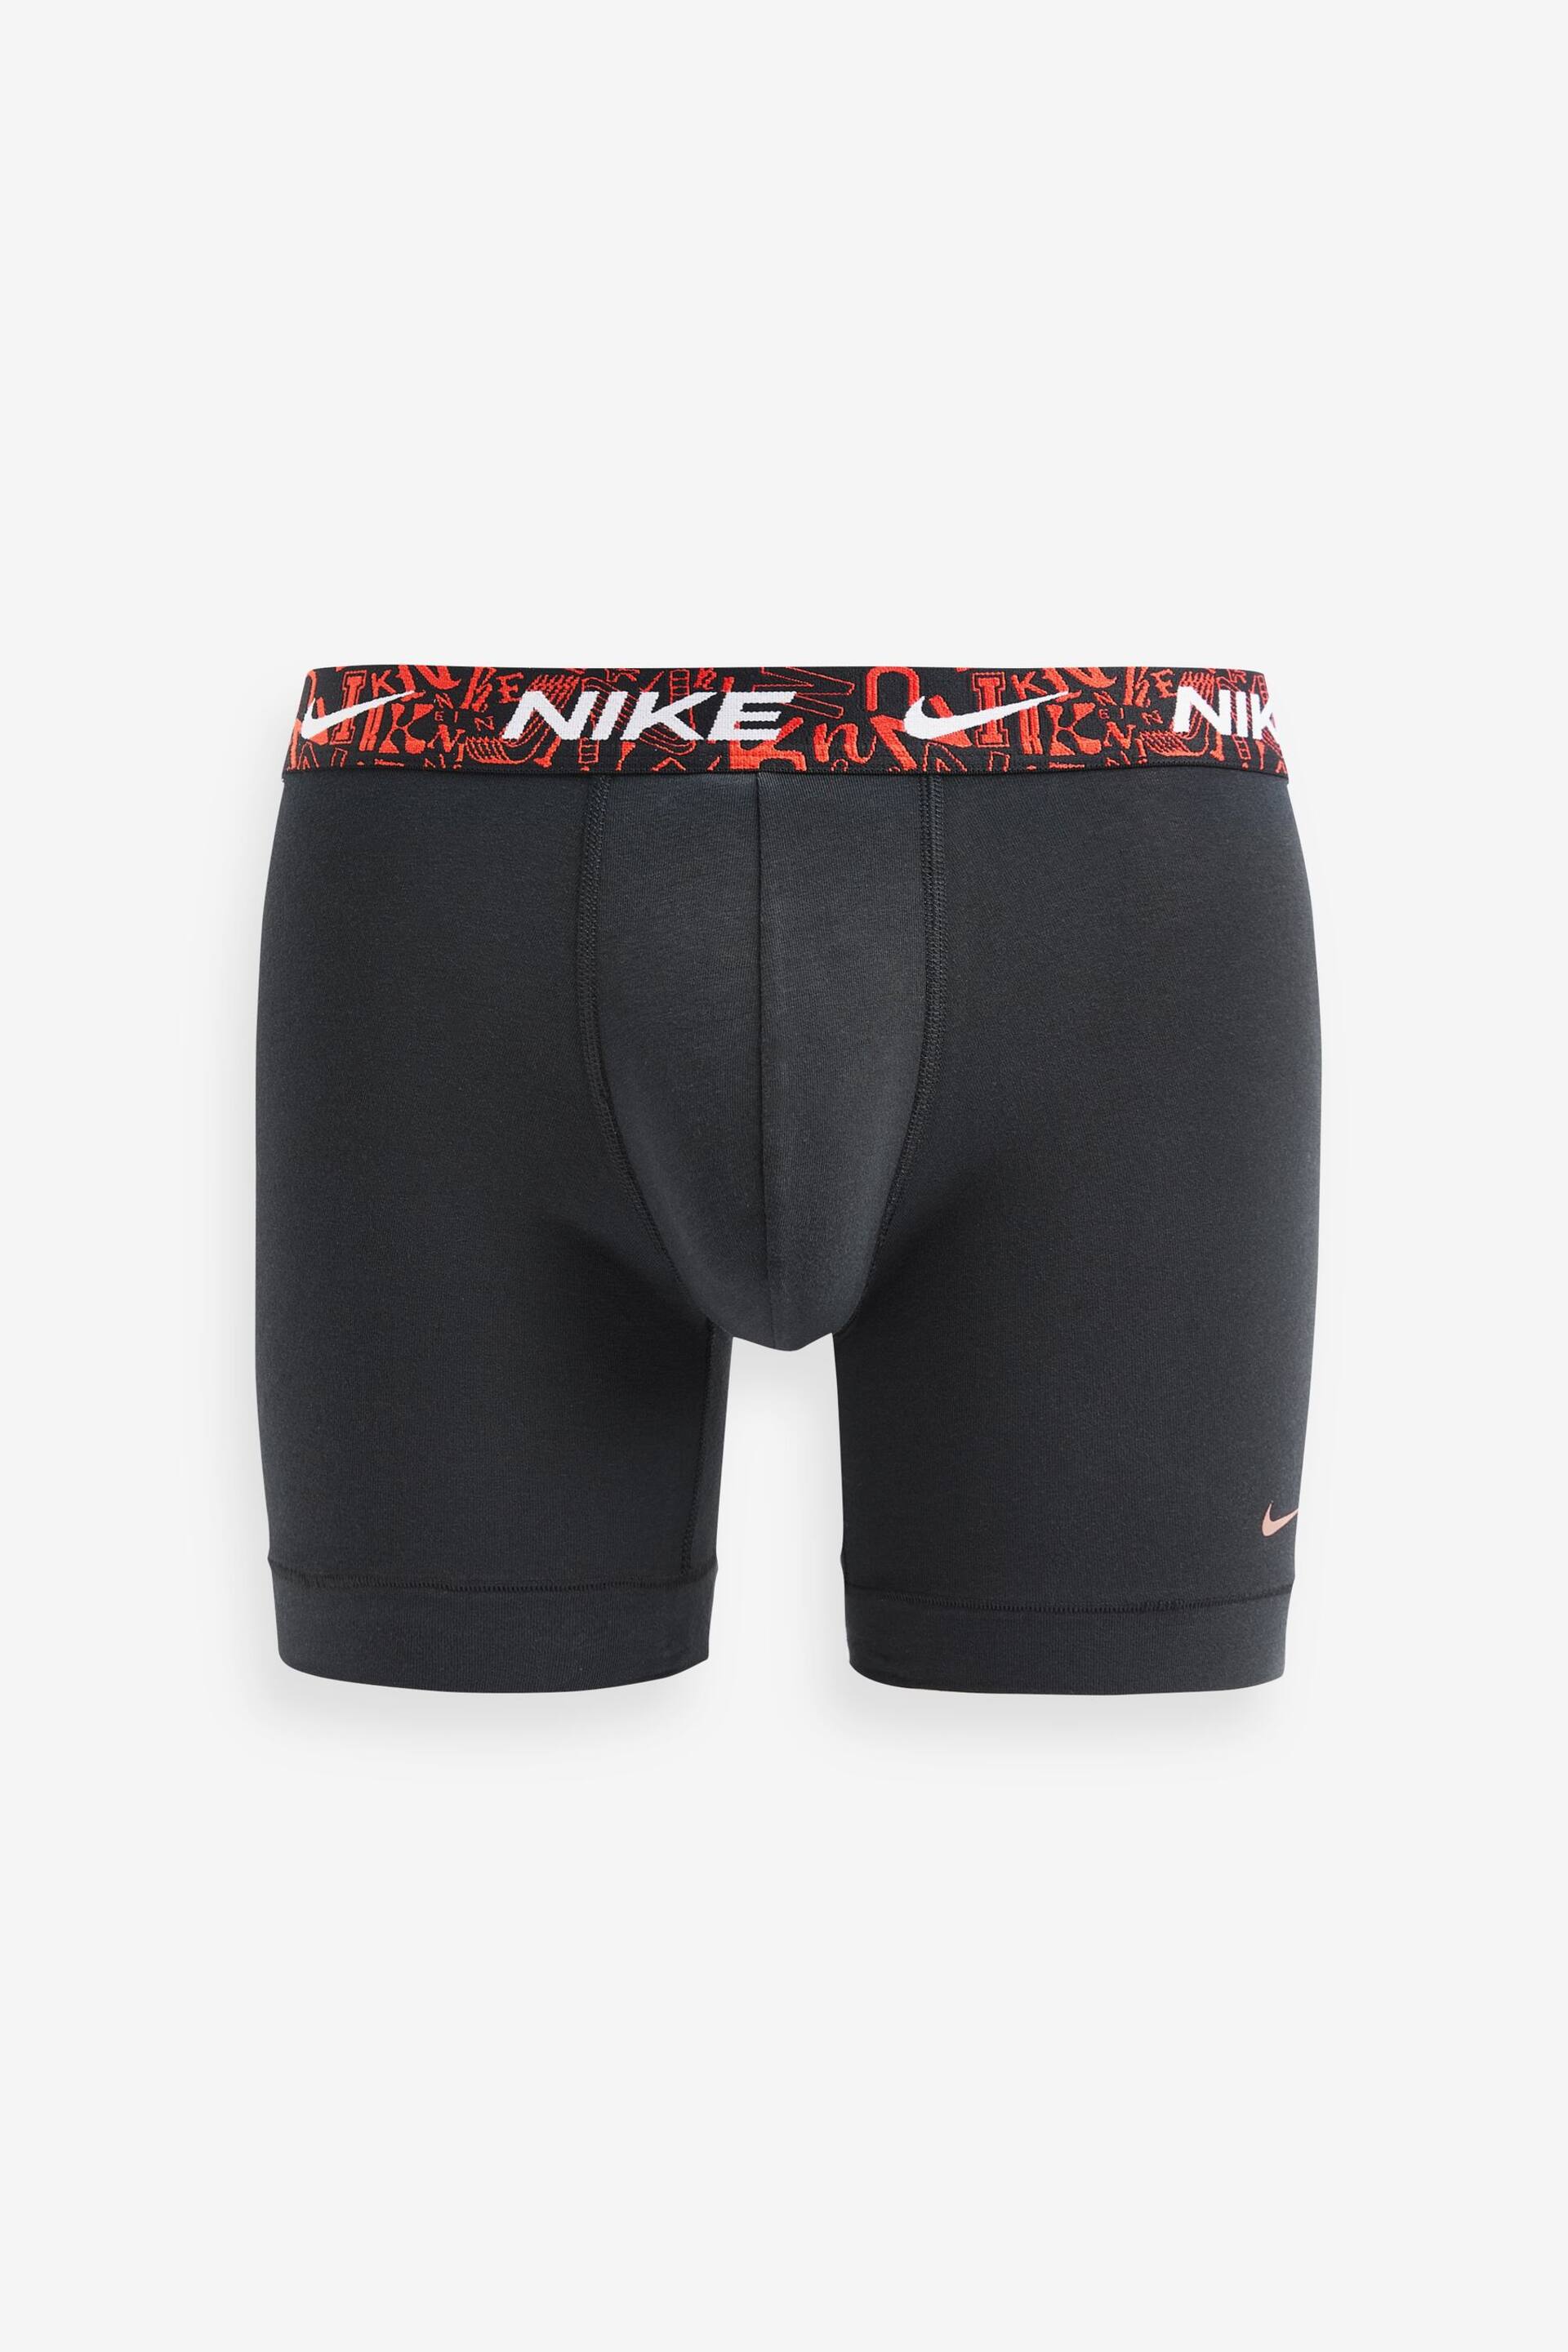 Nike Red Boxer Briefs 3 Pack - Image 3 of 4